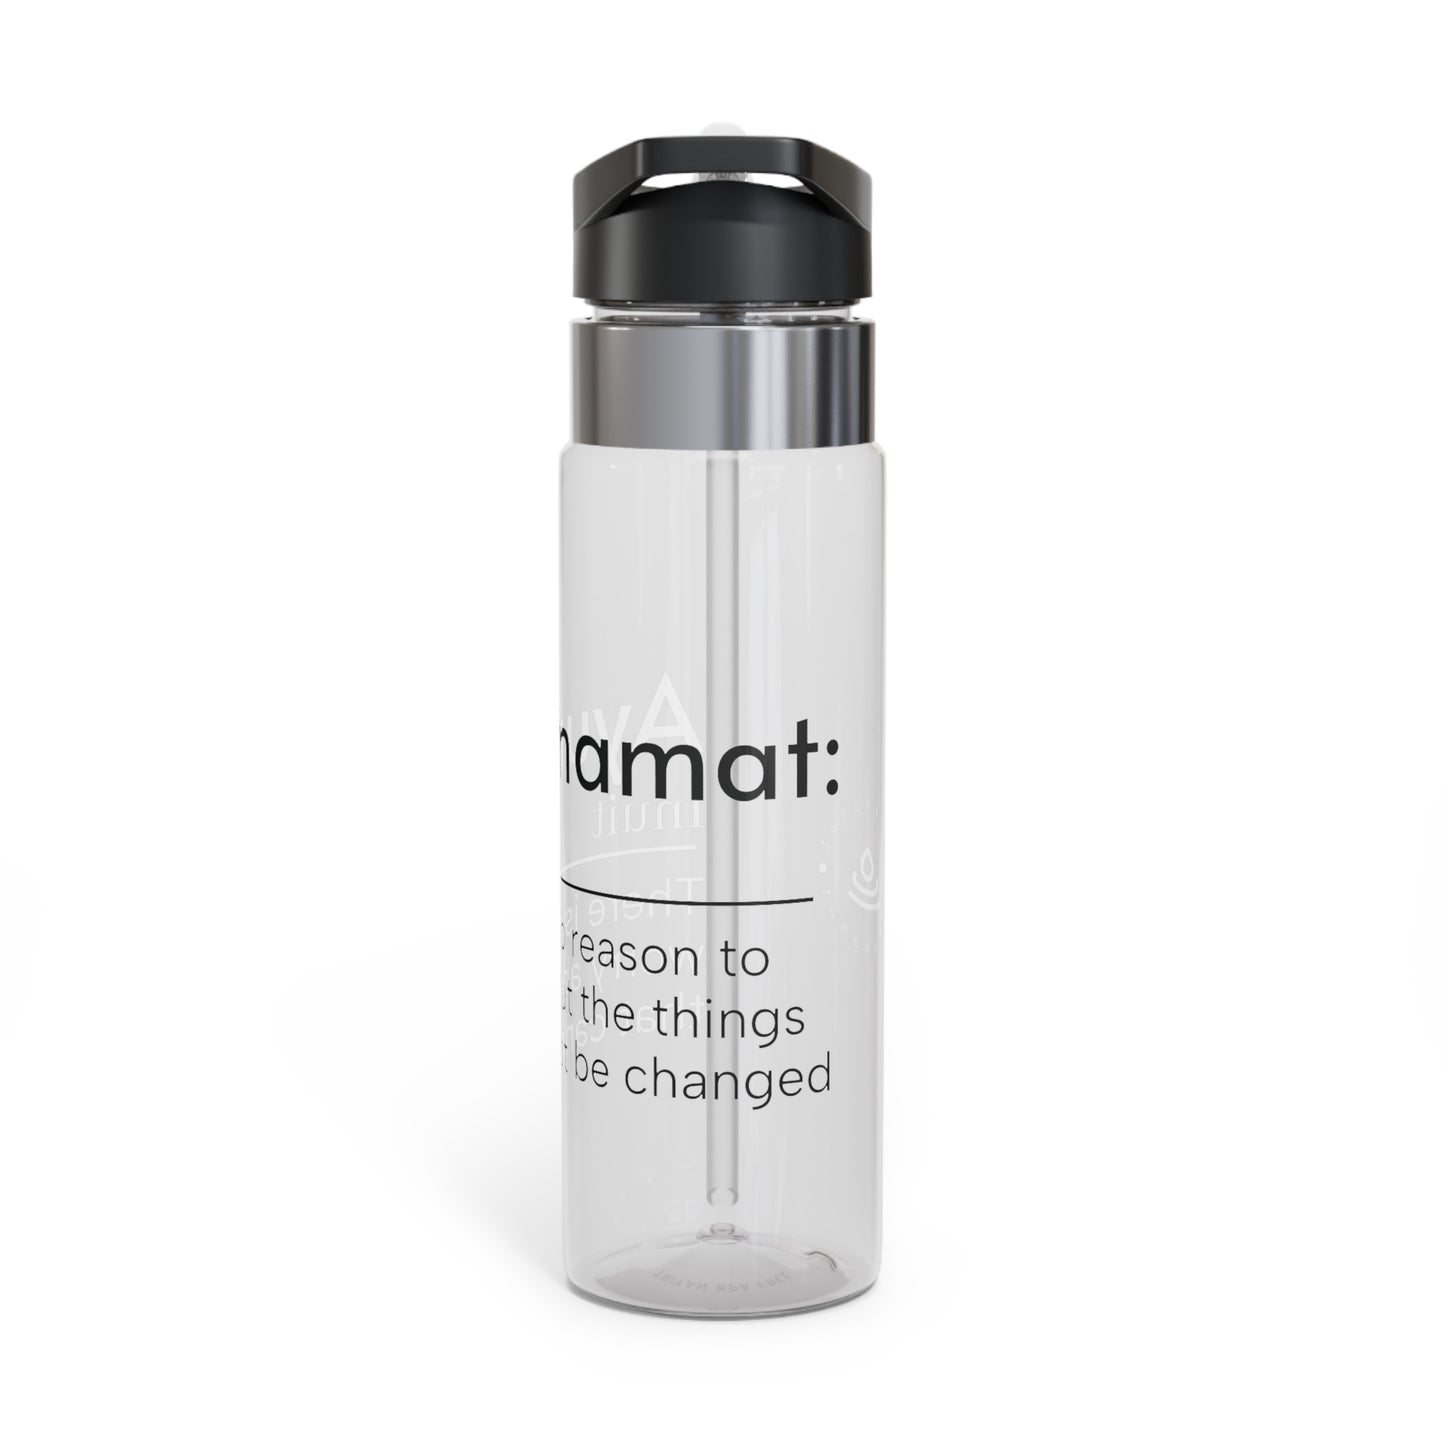 Ayurnamat Wellness Water Bottle - Hydration for Mind and Body